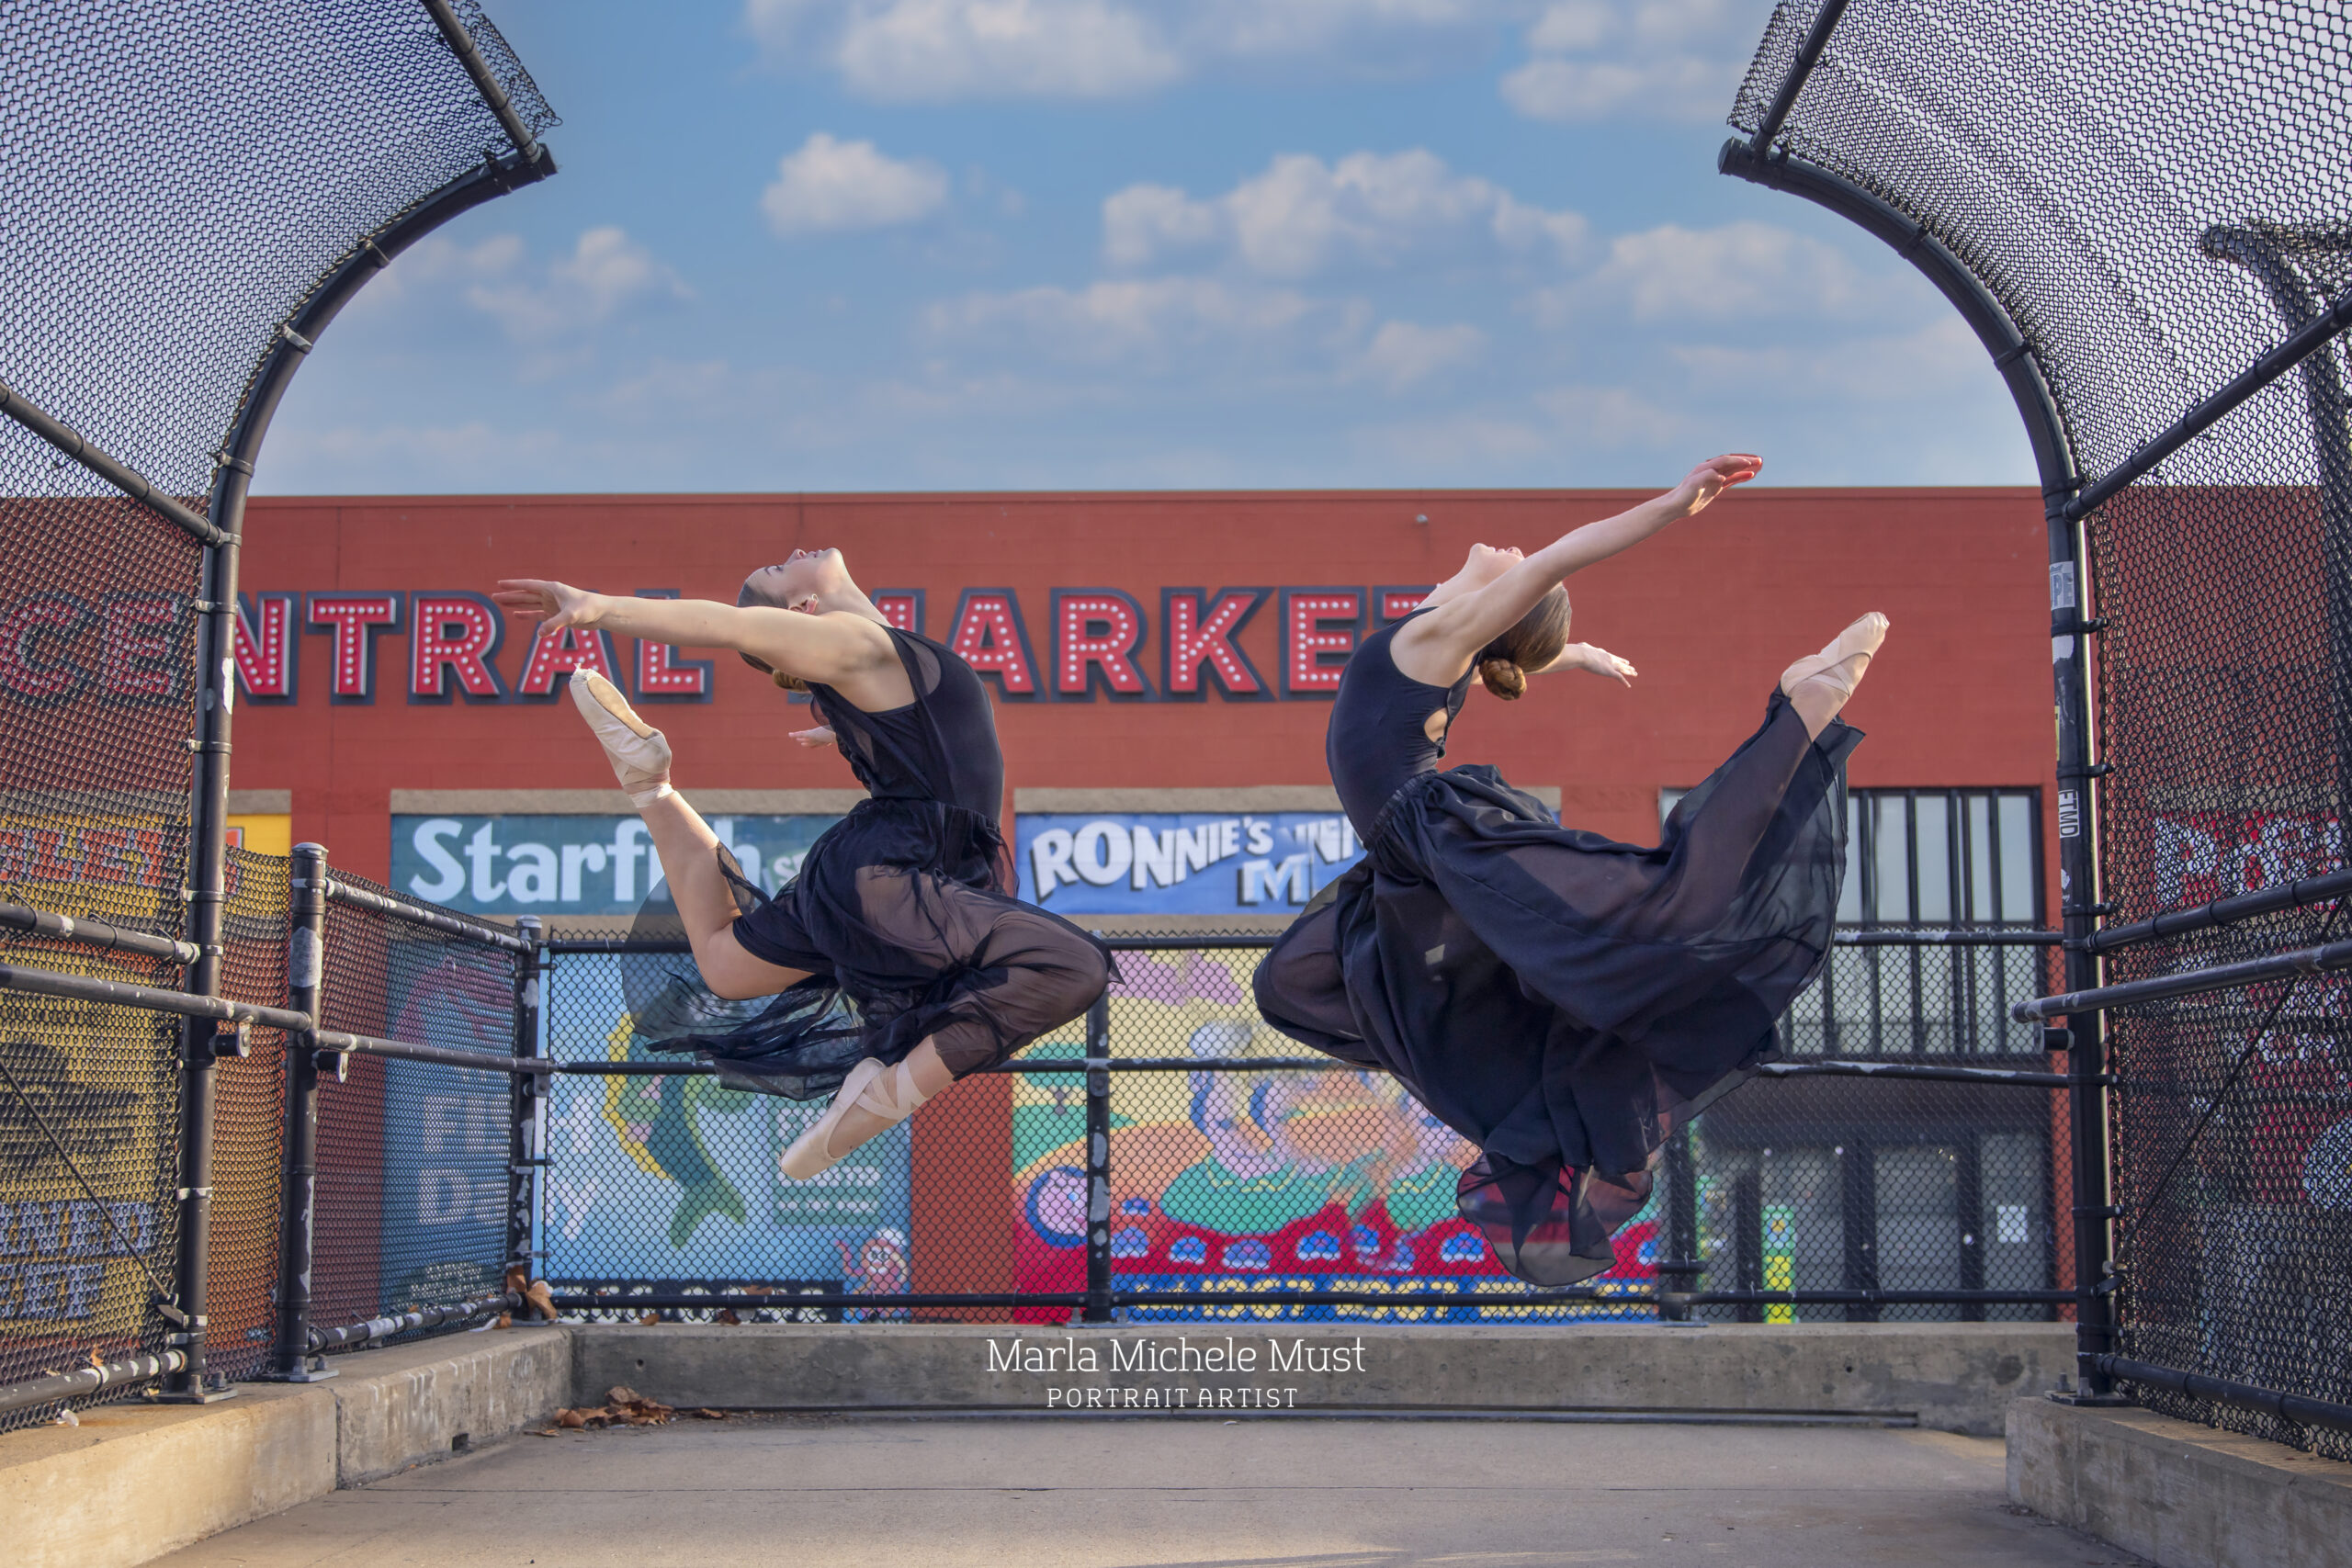 Two Detroit-area dancers mirror each other in identical black, flowing dresses and poses gracefully executed while soaring in the air with legs and arms extended behind them.